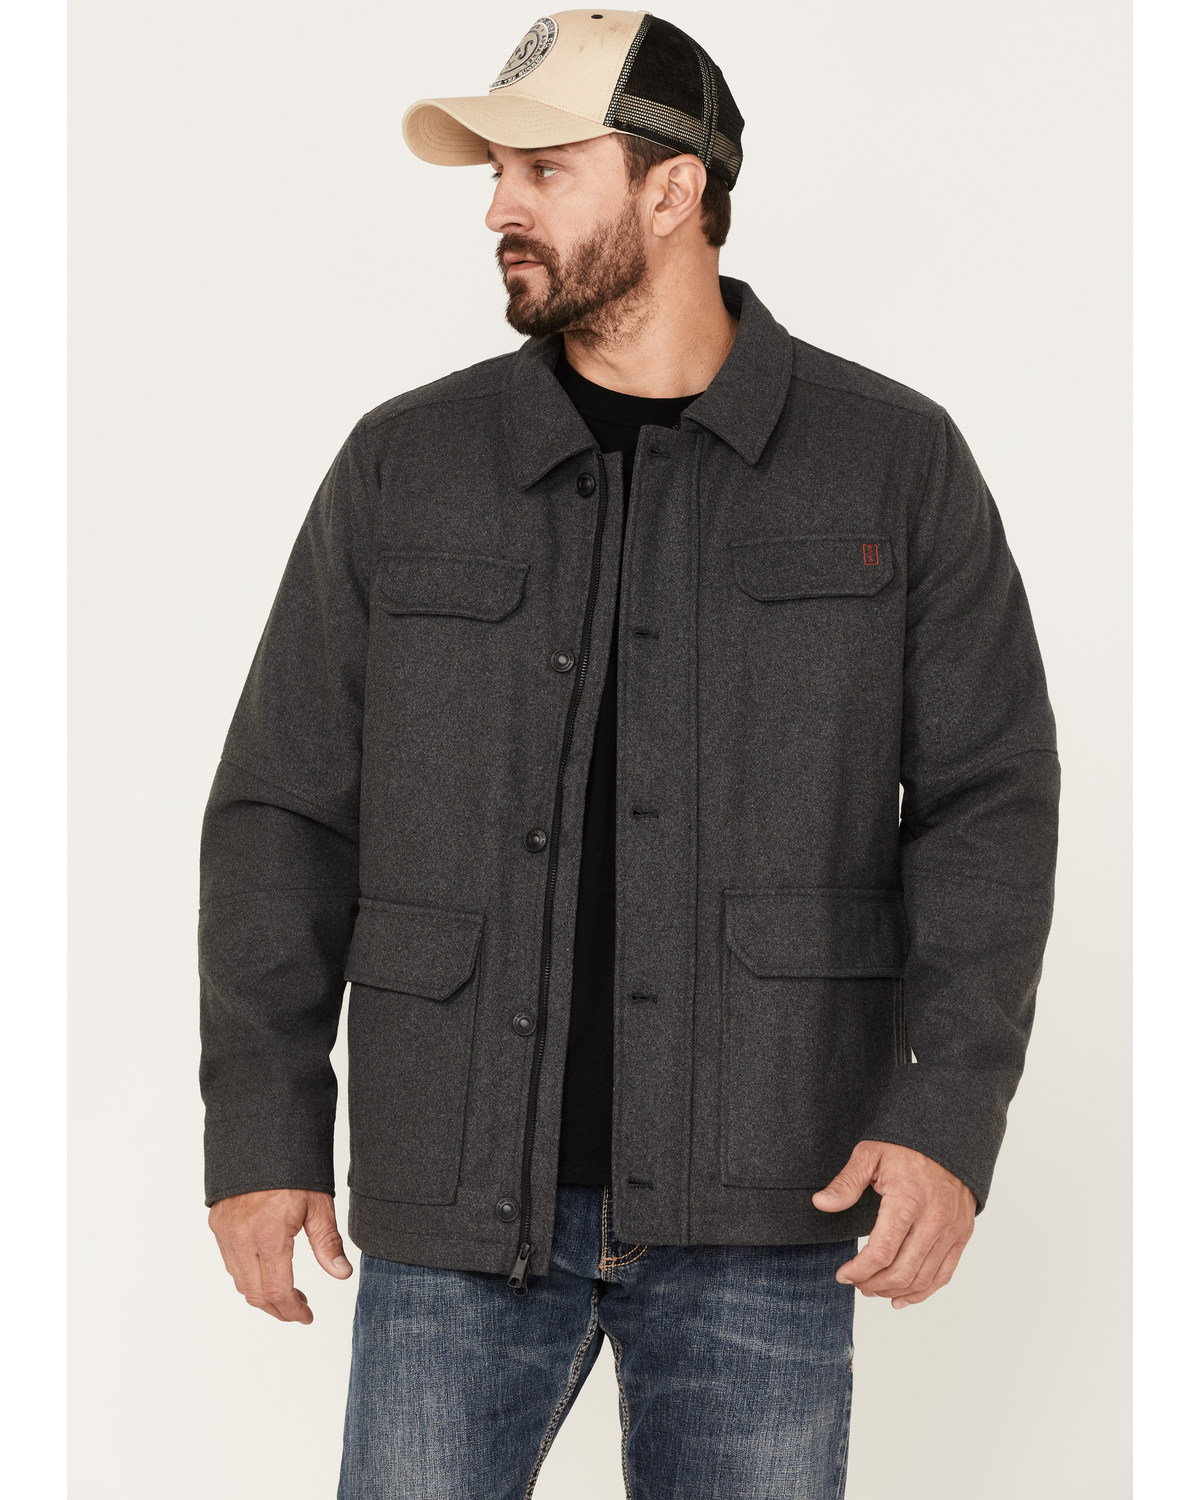 Brothers and Sons Wool Cruiser Jacket